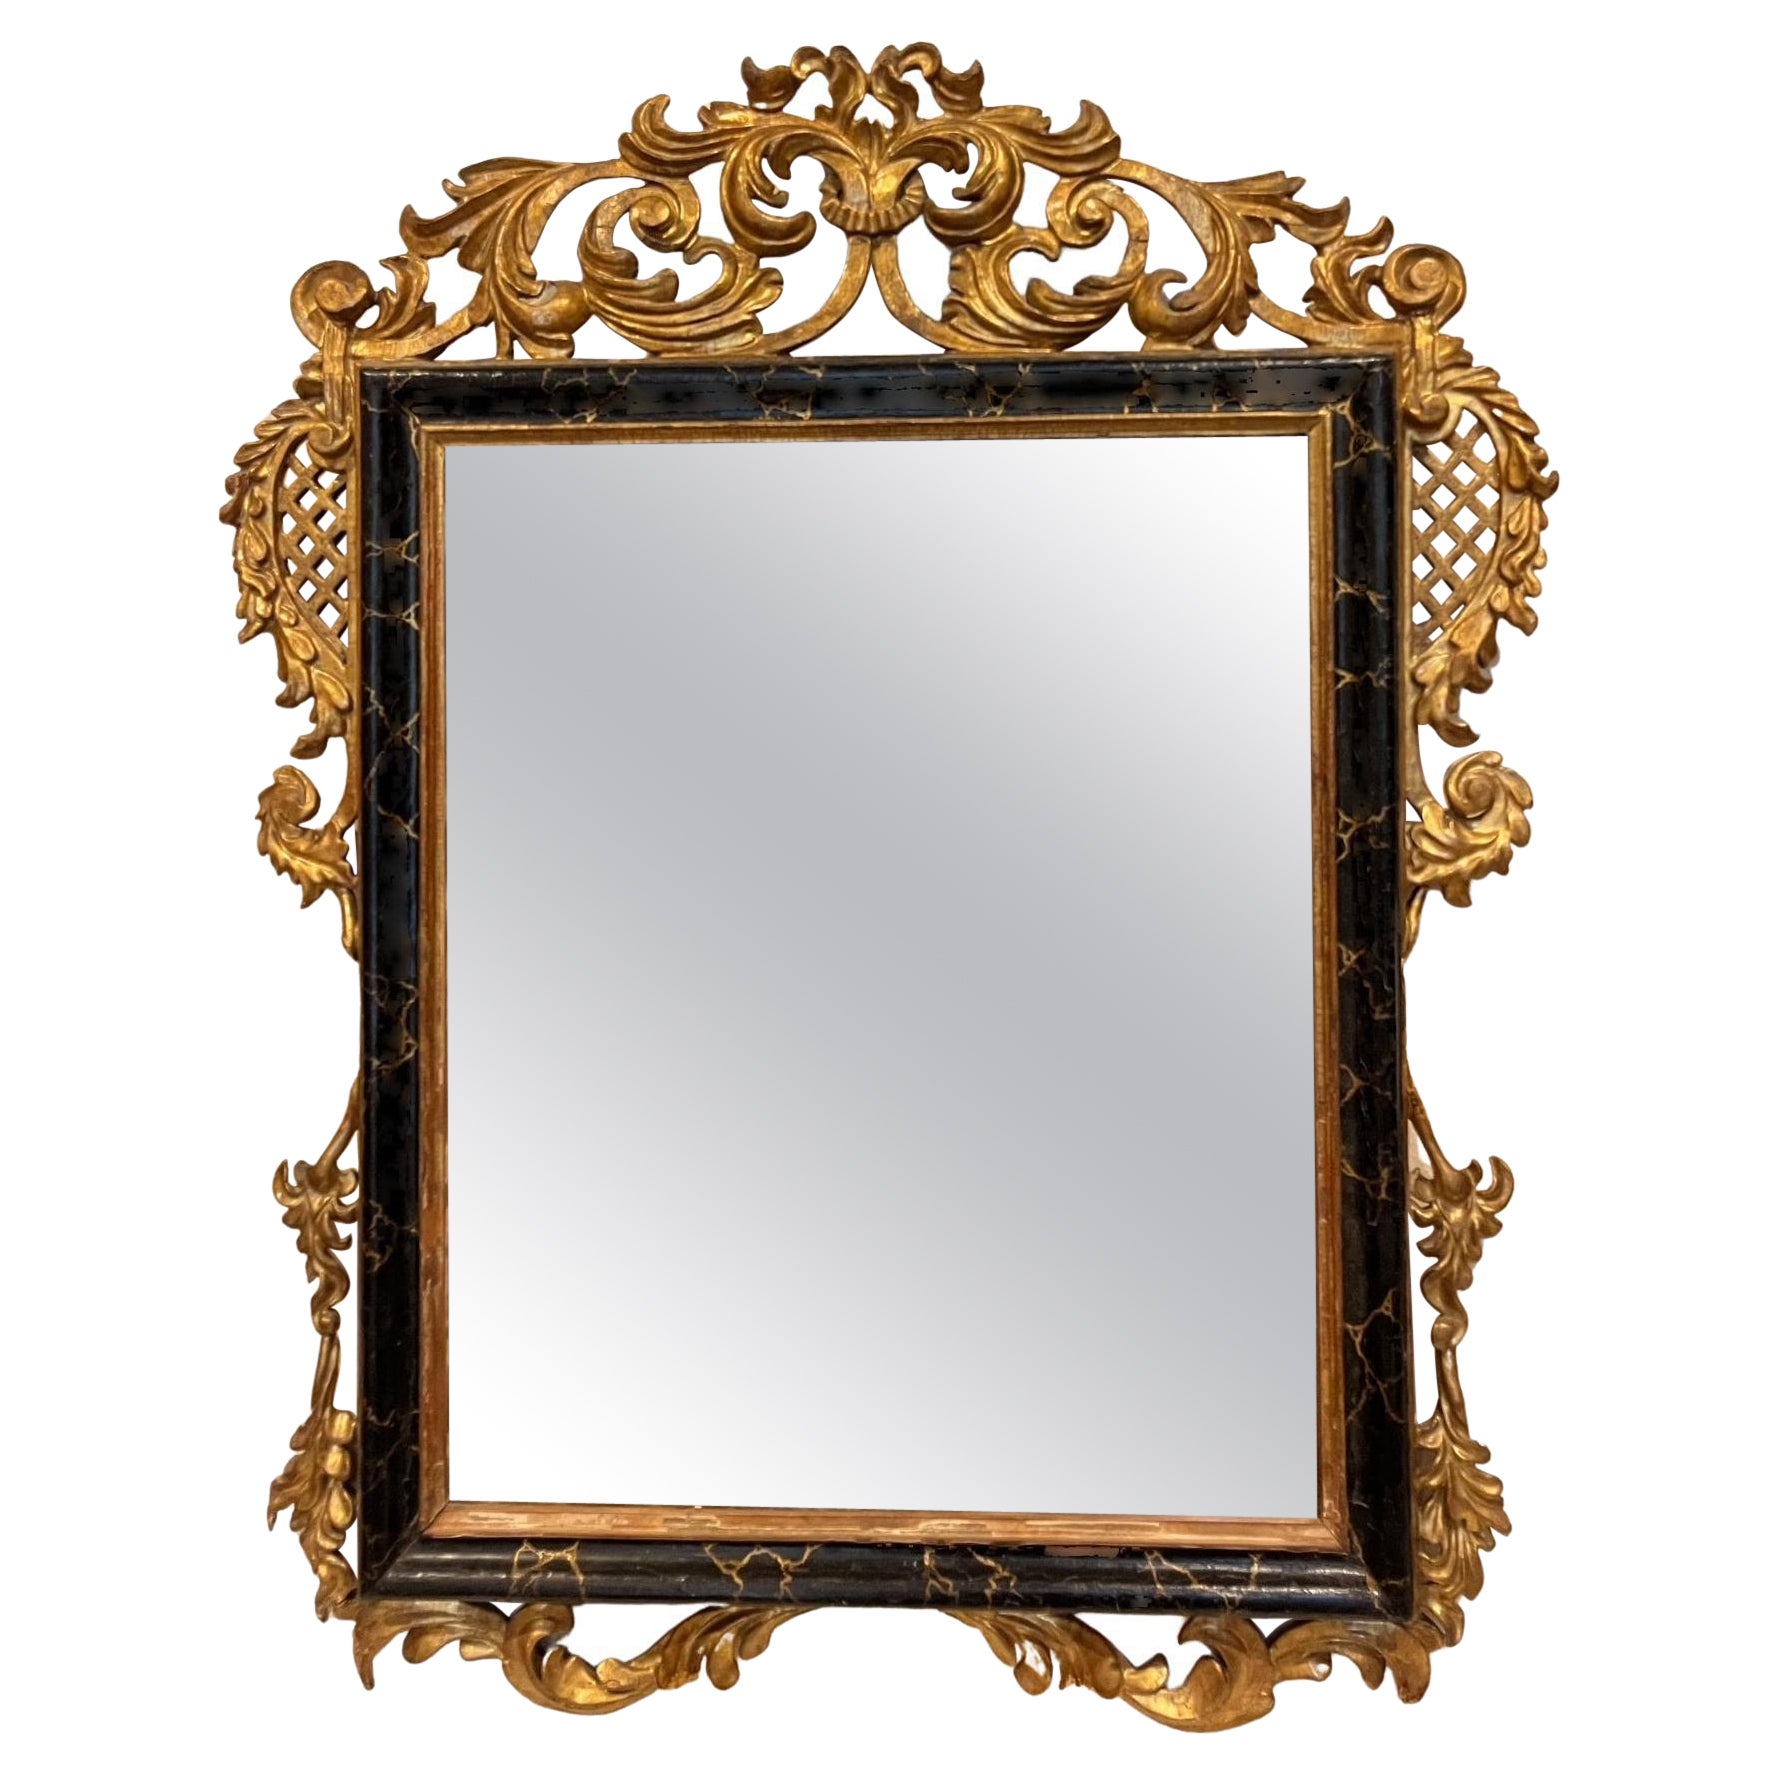 18th Century French Louis XV Period Rococo Giltwood Mirror For Sale